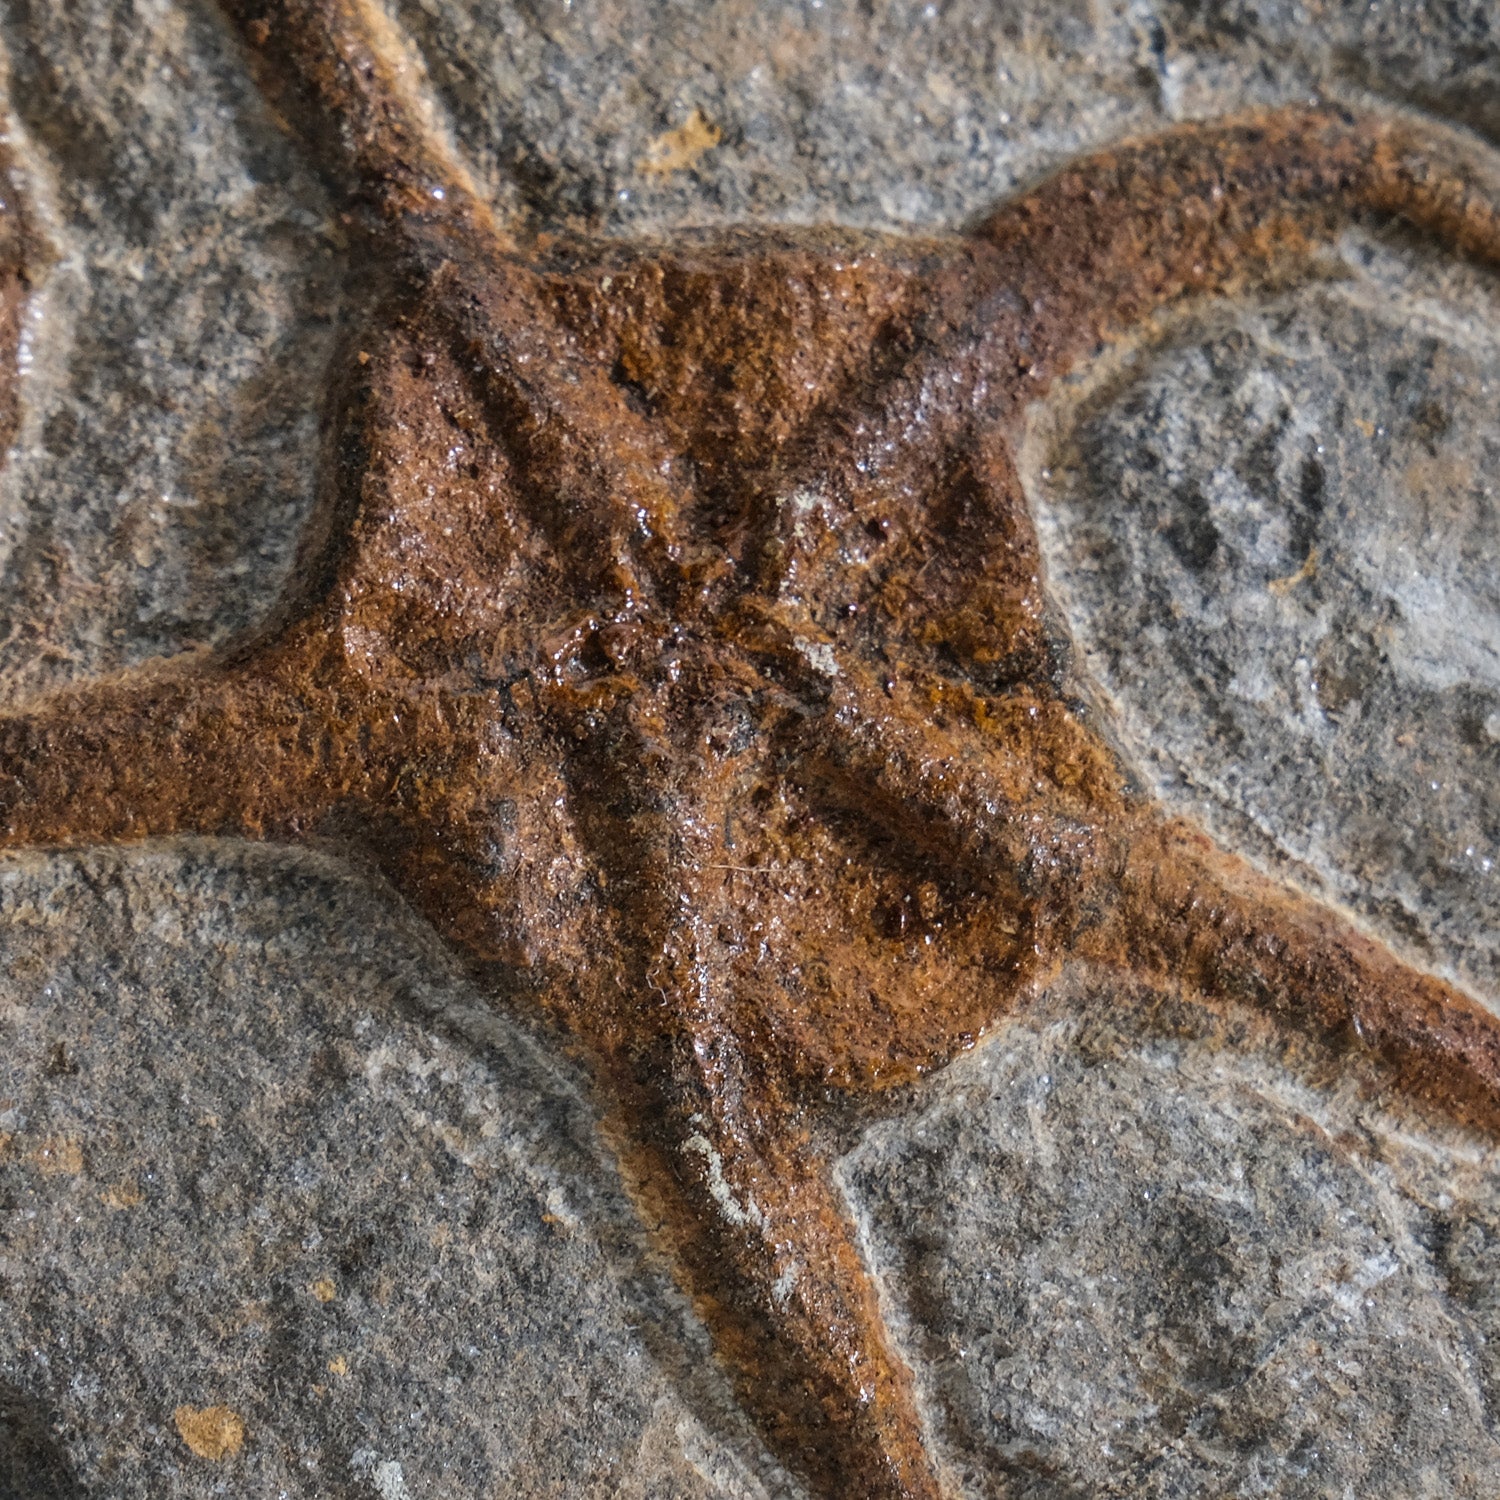 Ophiuroidea Brittle Star Fossil (1.2 lbs)